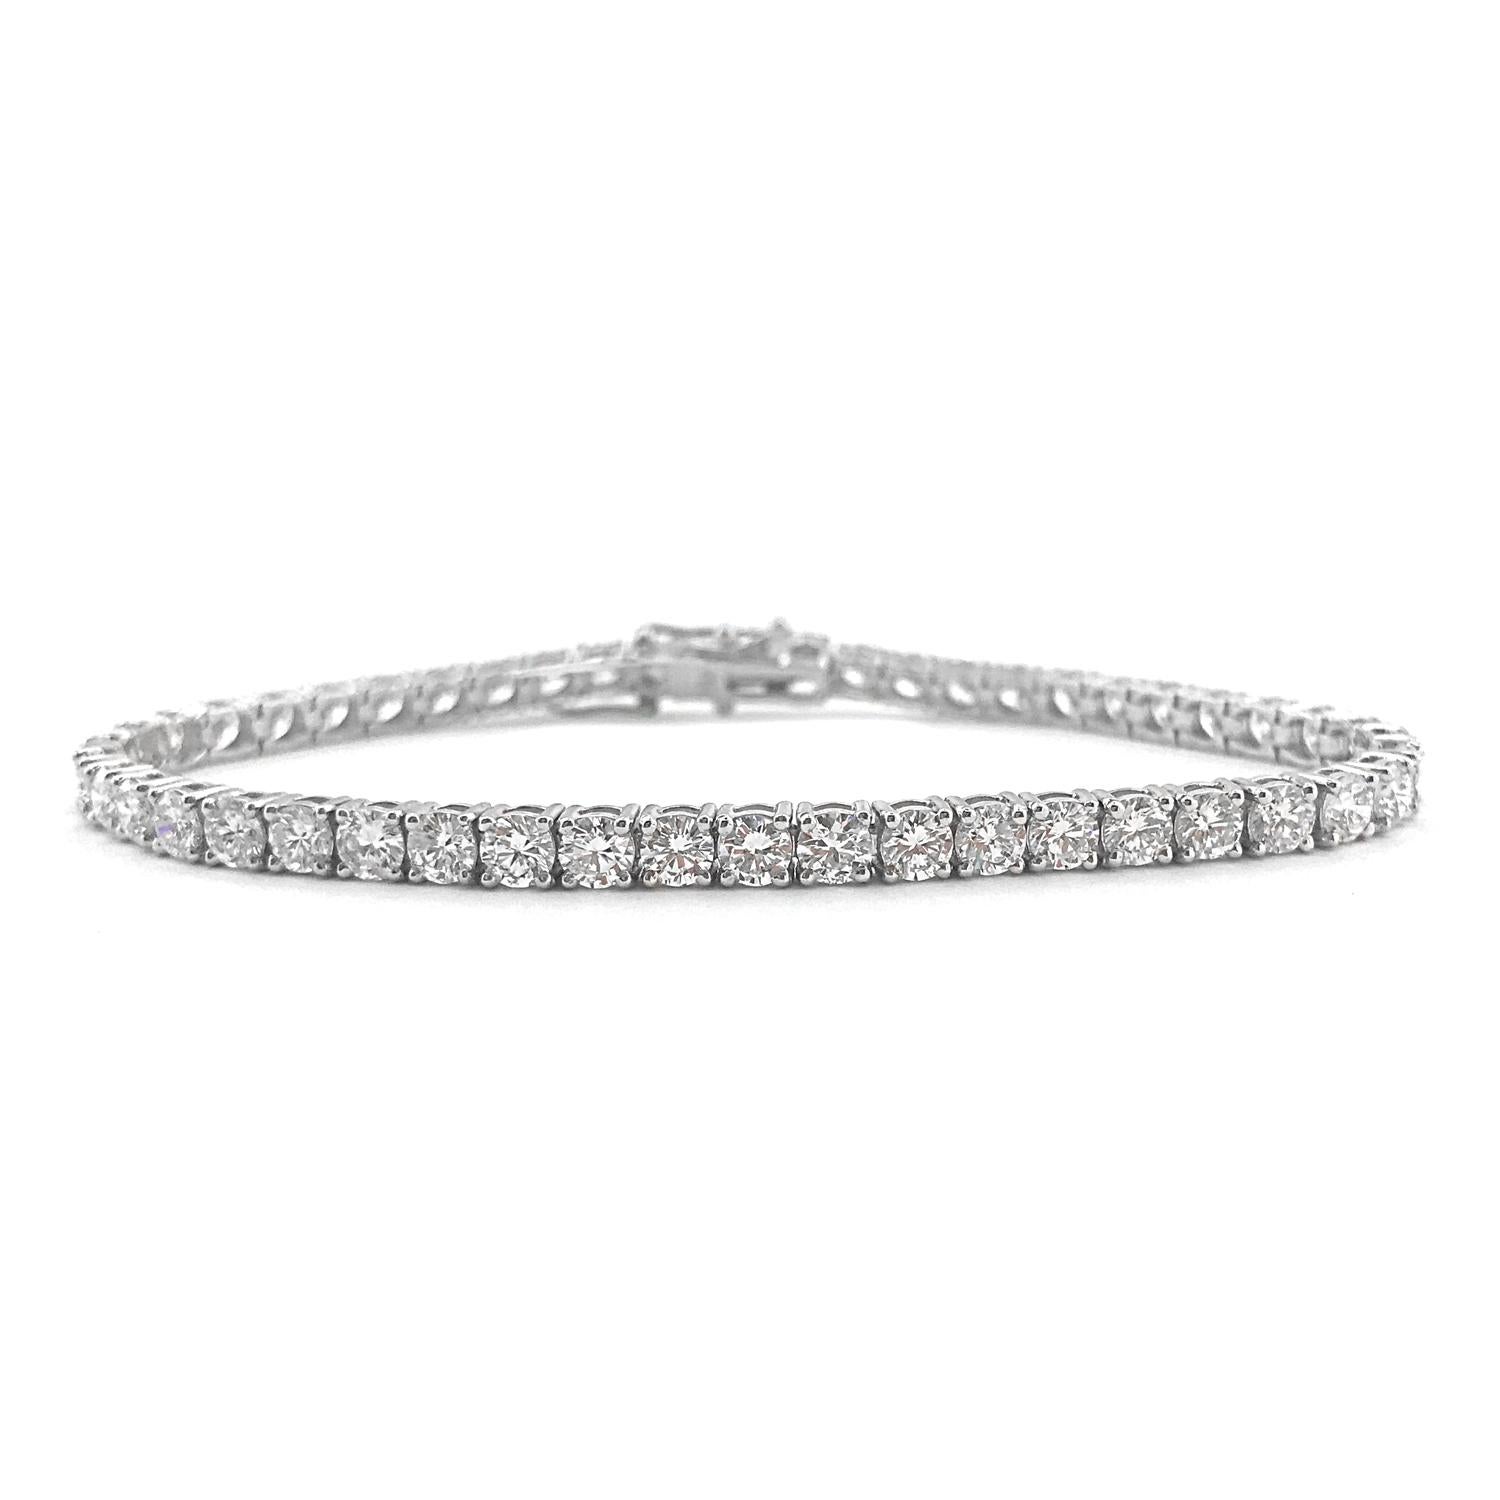 WHITE GOLD TENNIS BRACELET - 7.45 CT


Set in 18KT White gold


Total diamond weight: 7.45 ct
[ 48 diamonds ]
Color: G
Clarity: VS

Total bracelet weight: 12.69 grams